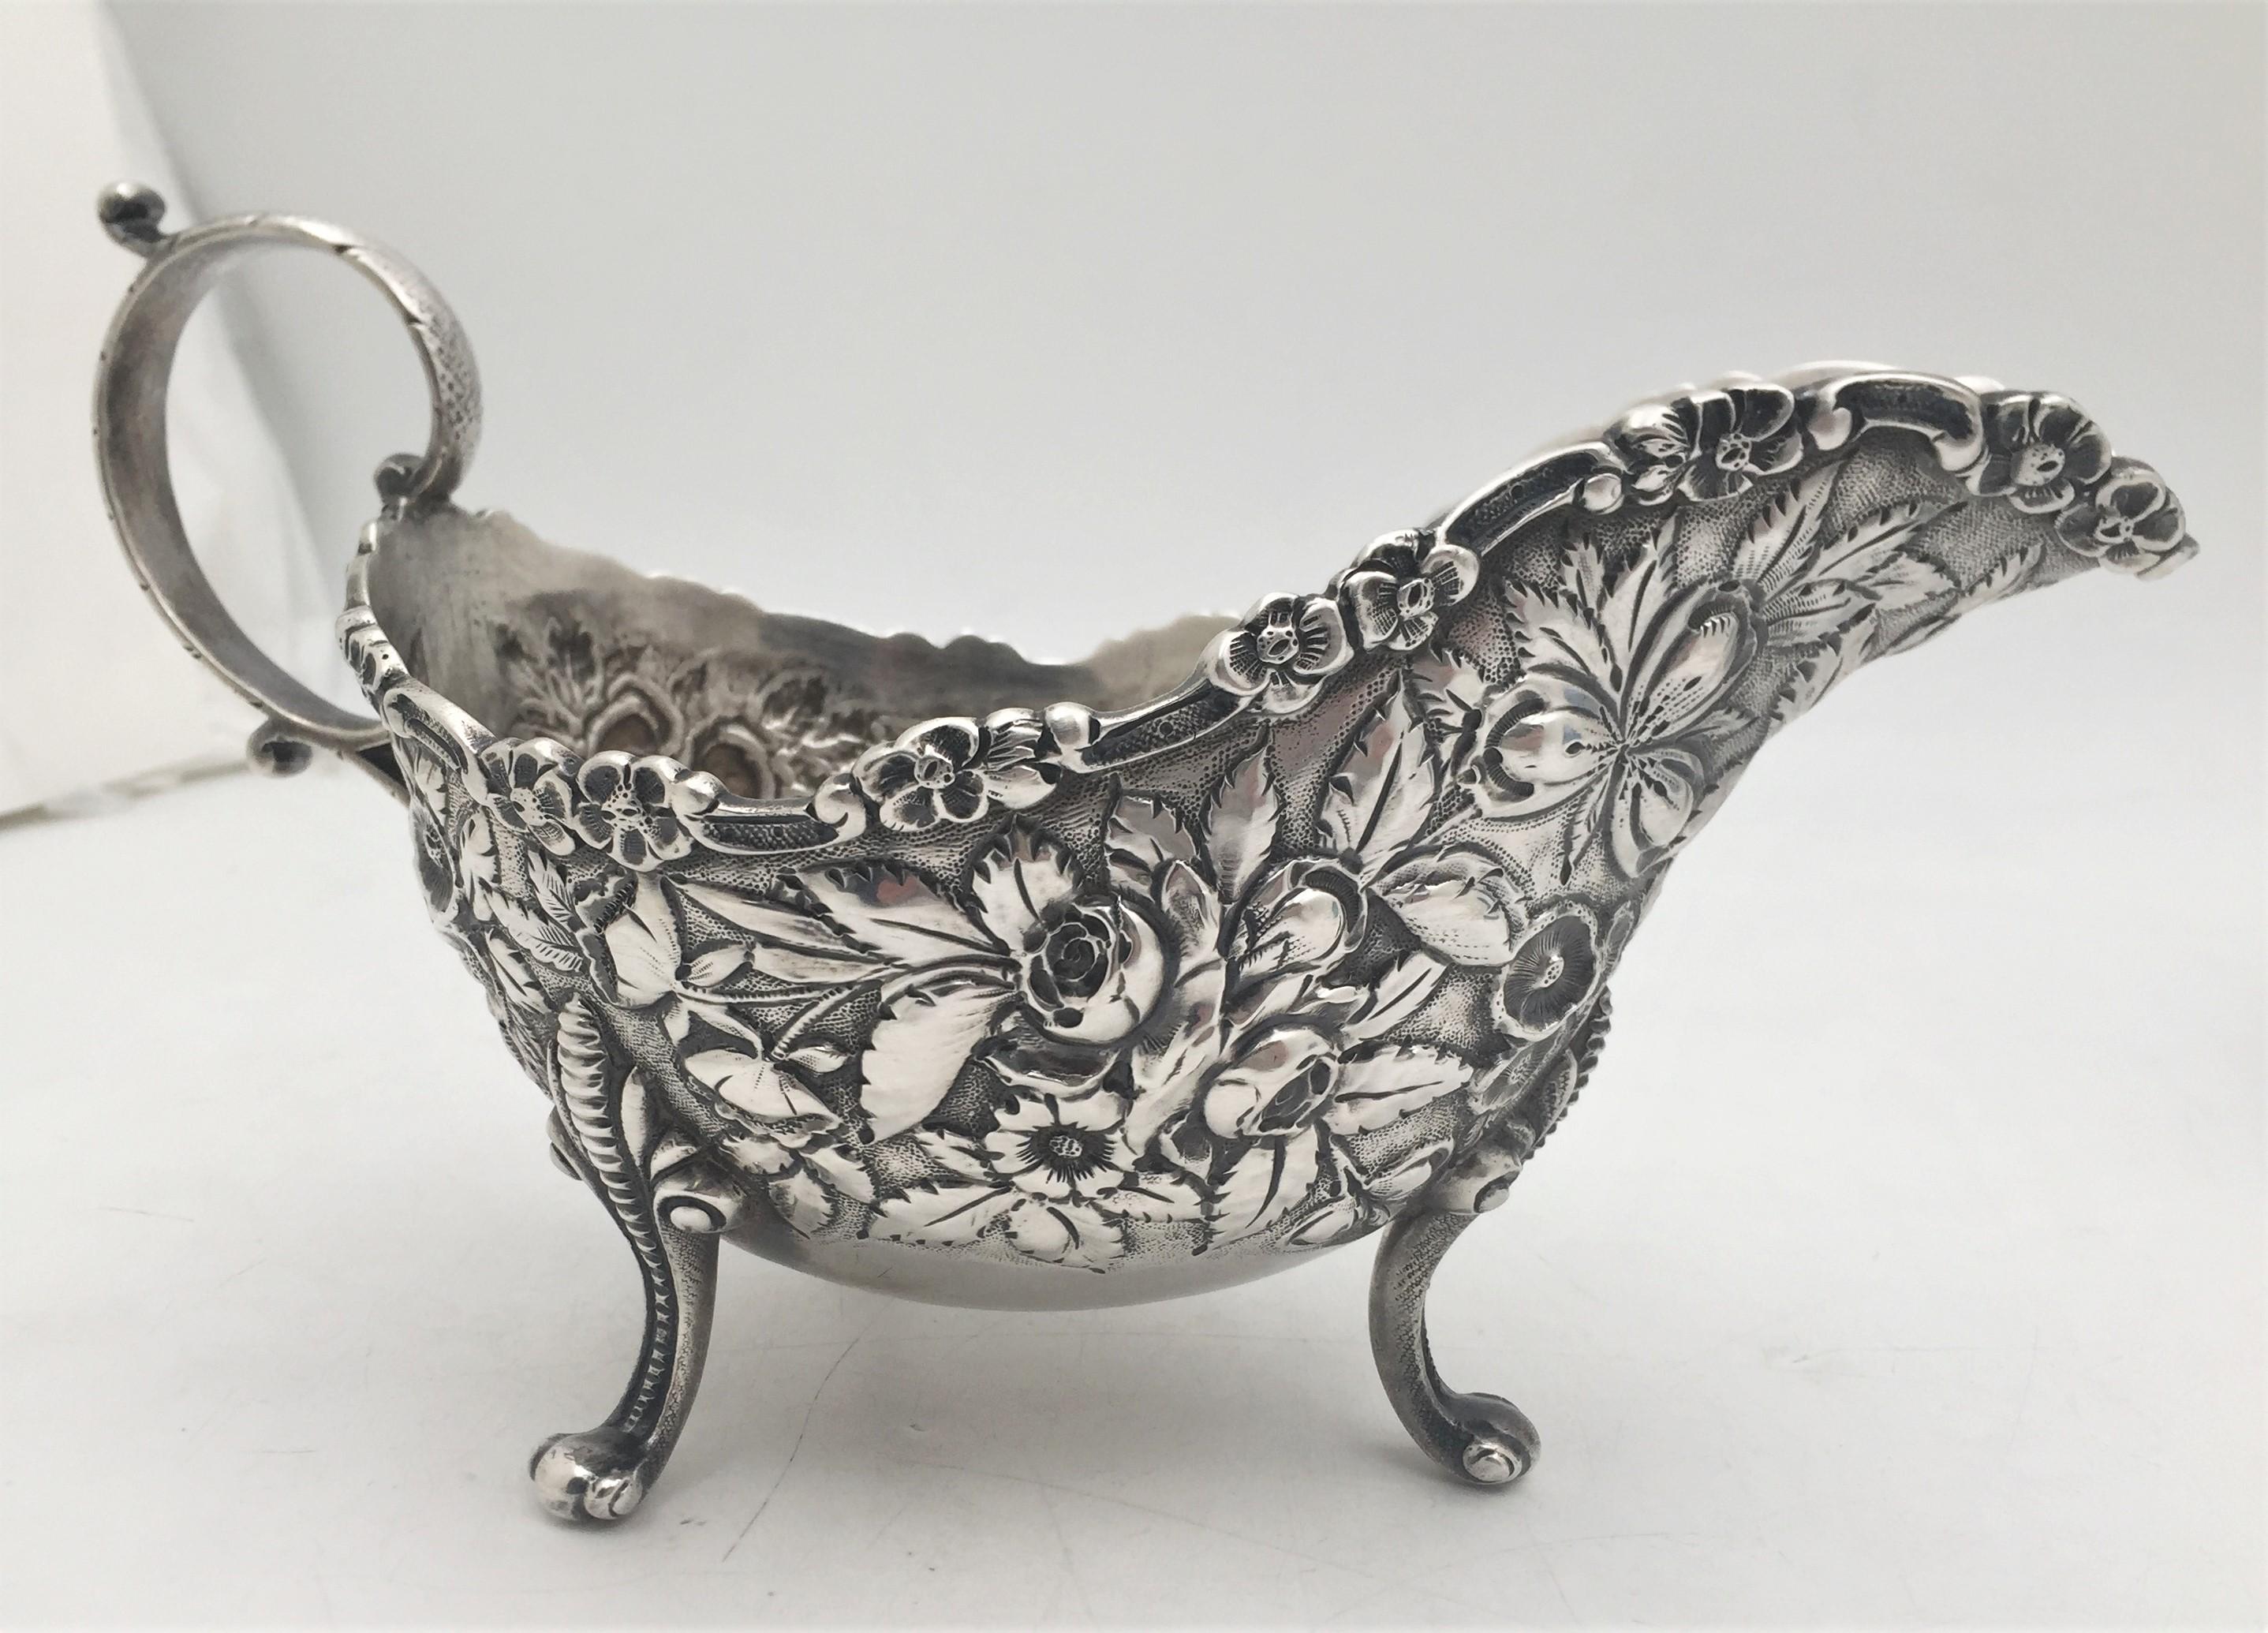 Set of two S. Kirk & Son, sterling silver sauce boats from the late 19th or early 20th century, in repousse pattern with exquisite, highly realistic, floral motifs, standing on 3 legs, with handles adorned with leaf motifs. Each measures 8 1/8''